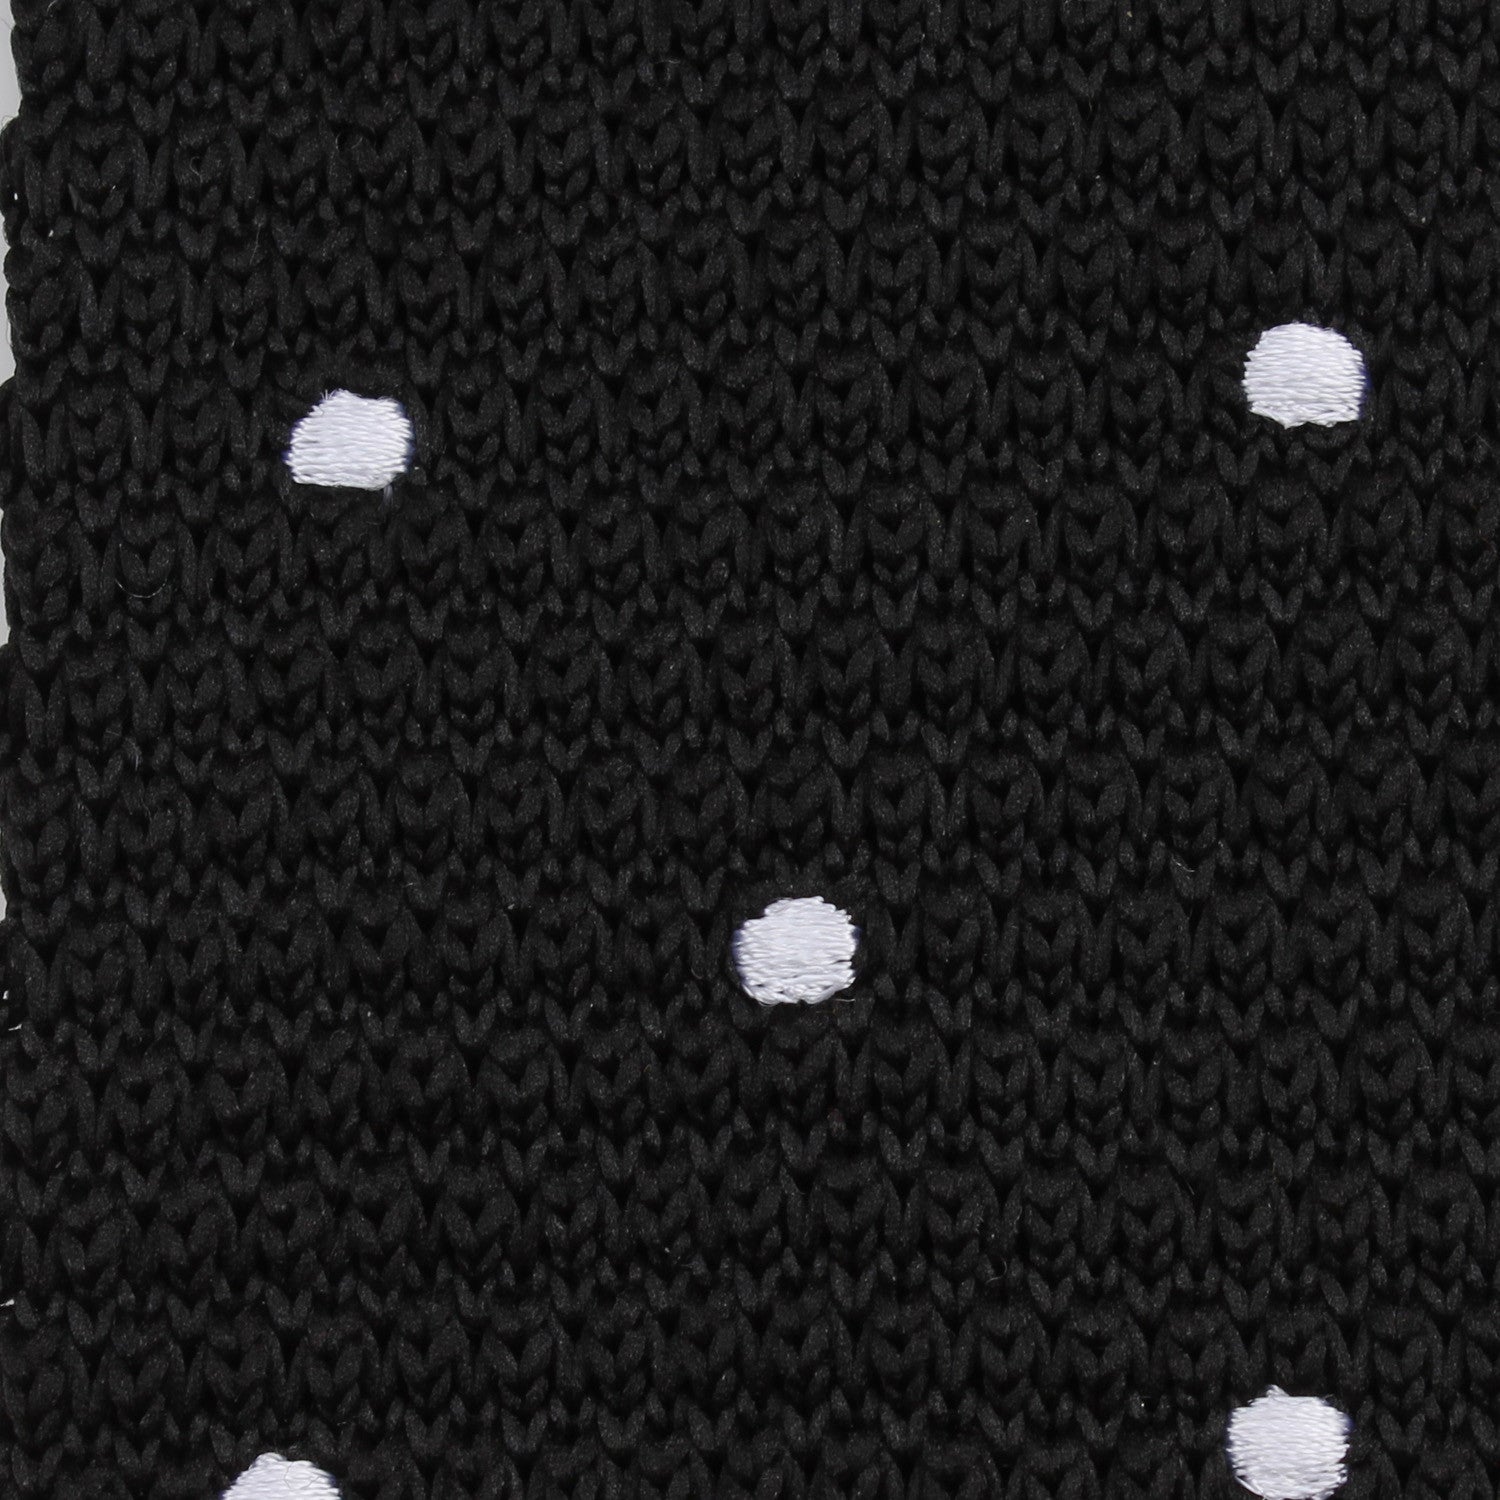 Black Knitted Tie with White Polka Dots Detail View